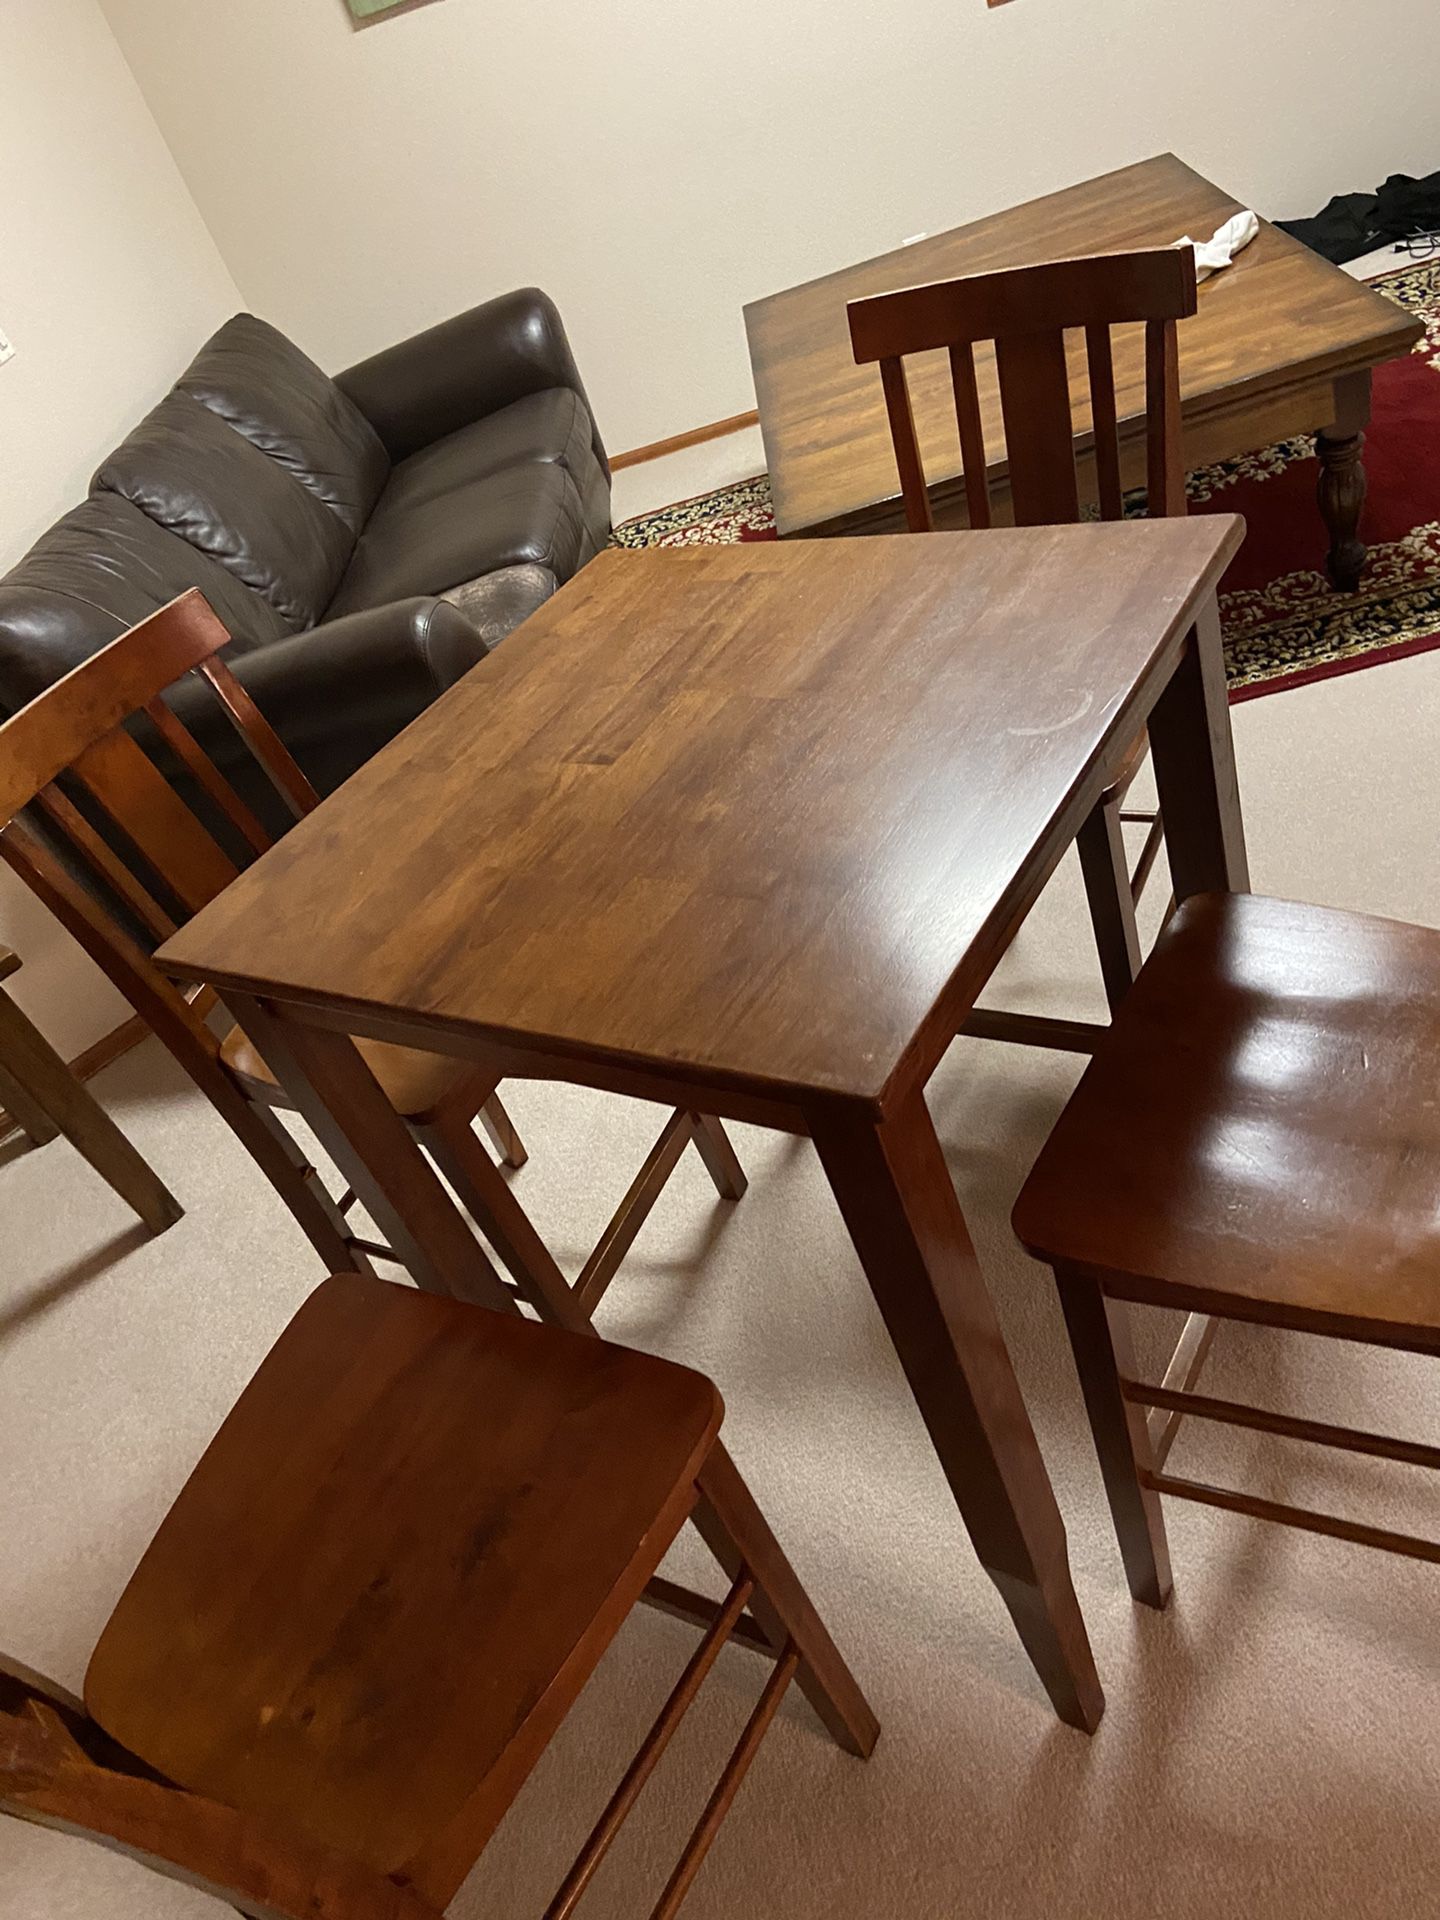 Cute counter height table 30x30x36 with 4 chairs.